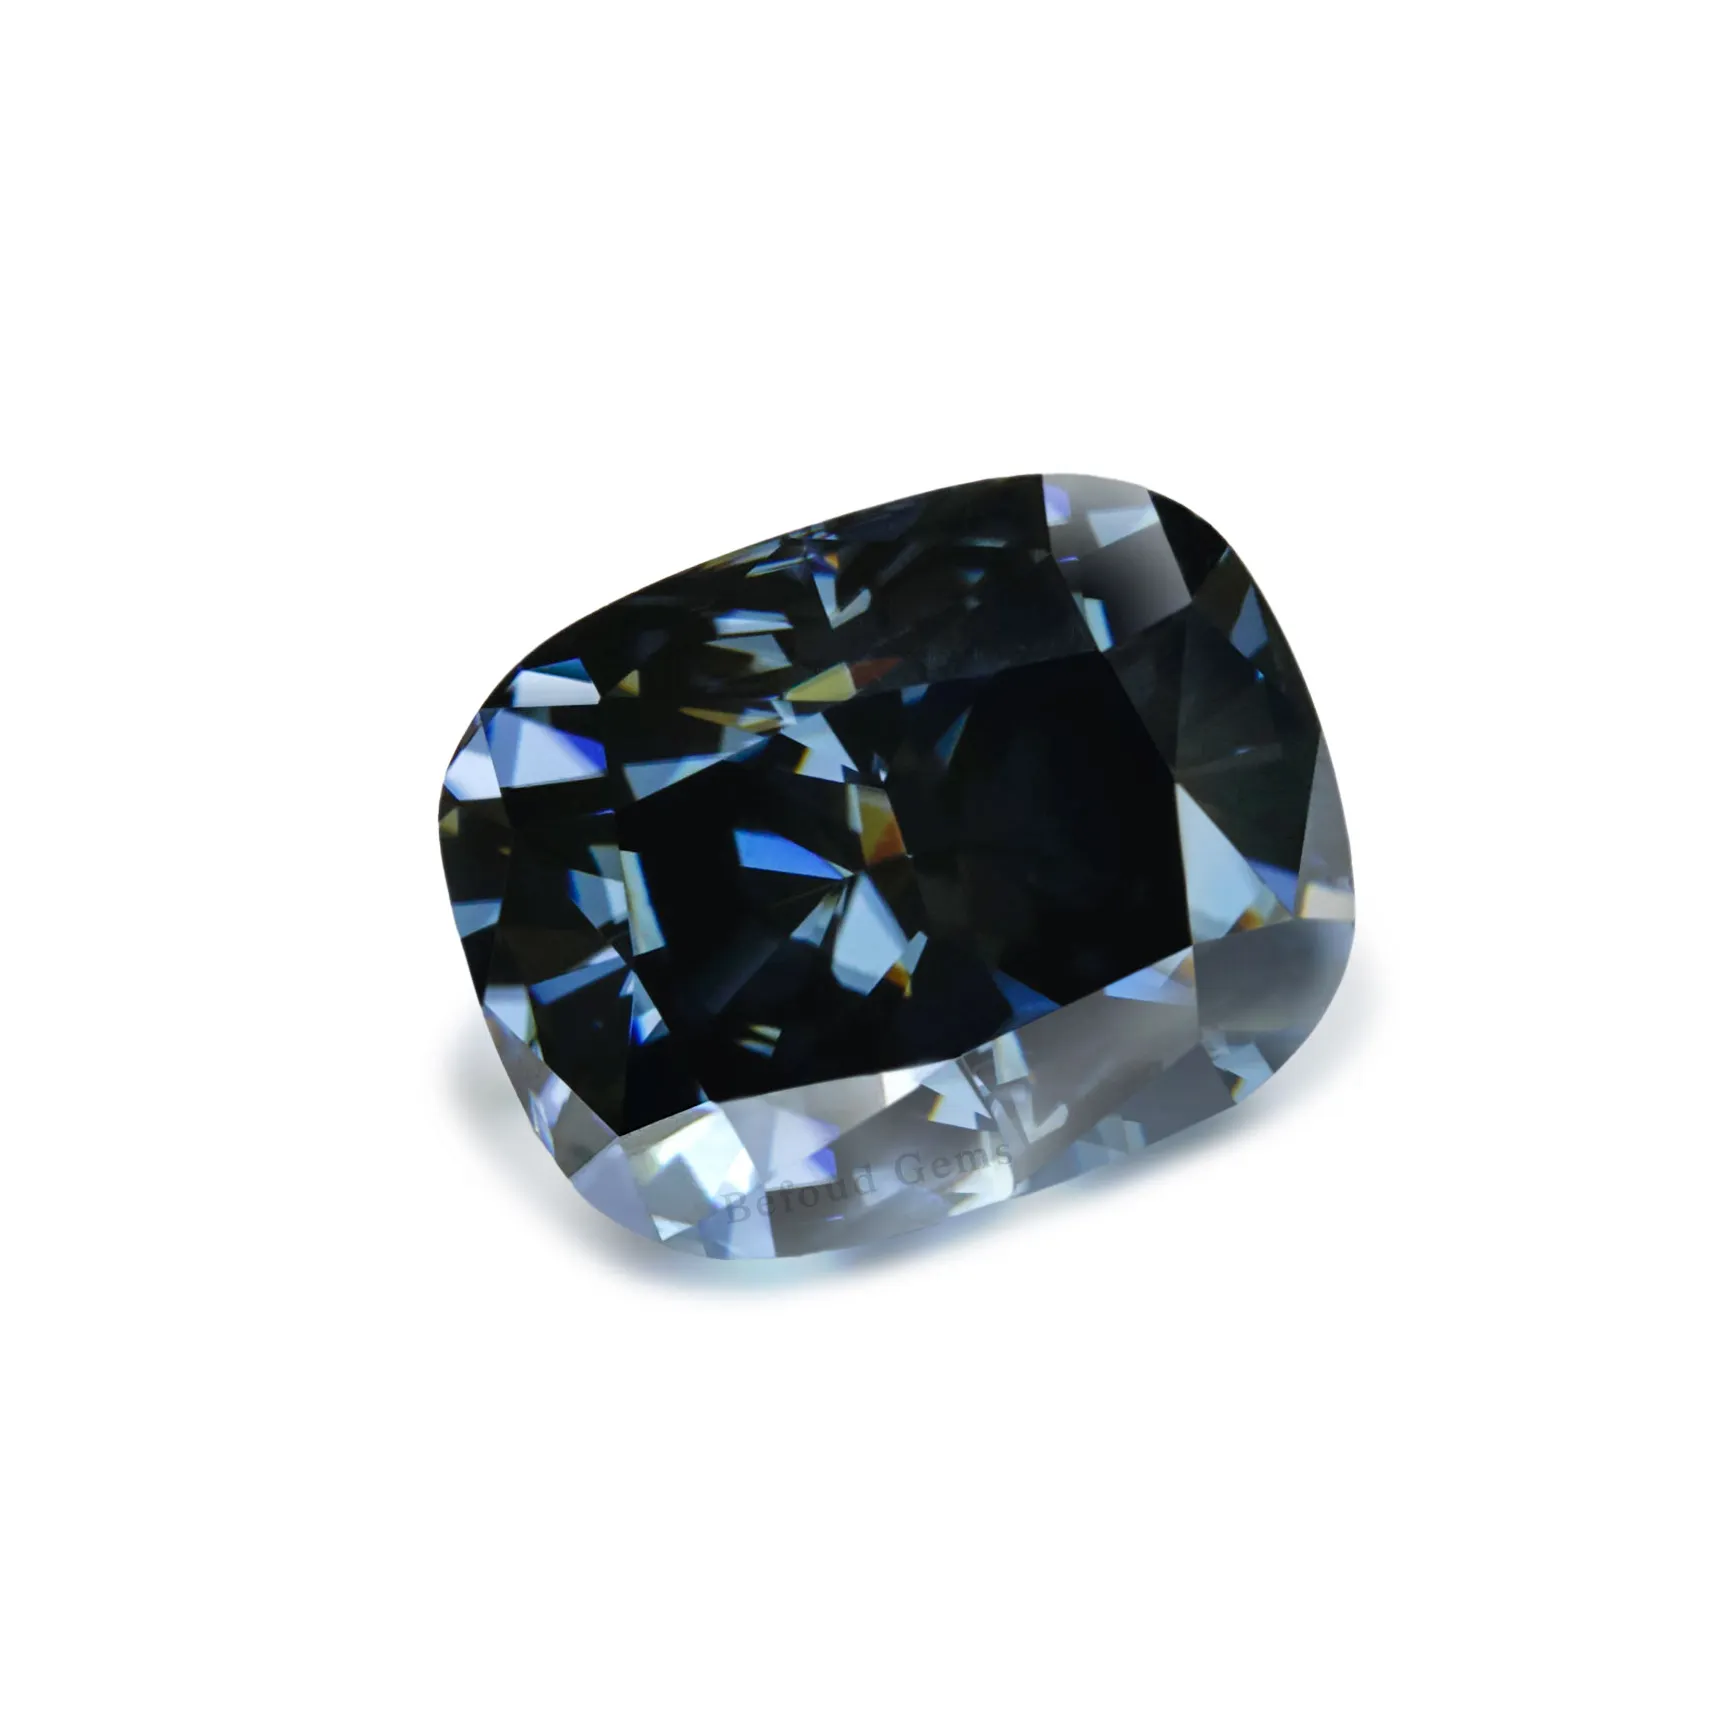 Blue Cushion Cut Moissanite 10*8mm Used Lab Grown Loose Gemstone Moissanite Diamond For Jewelry Ring